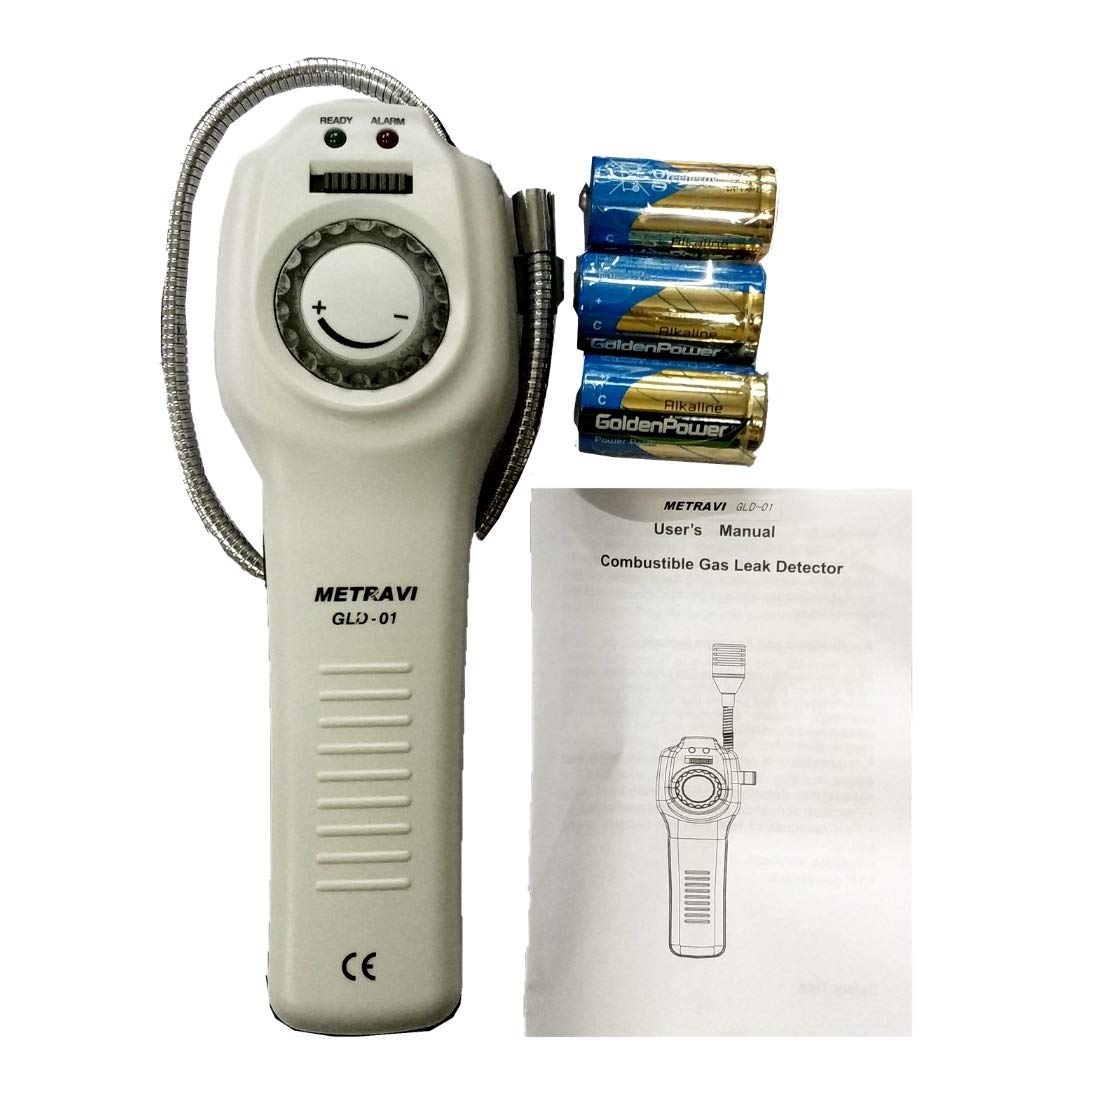 Metravi GLD-01 Combustible Gas Leakage Detector with Audio & Visual Alarms